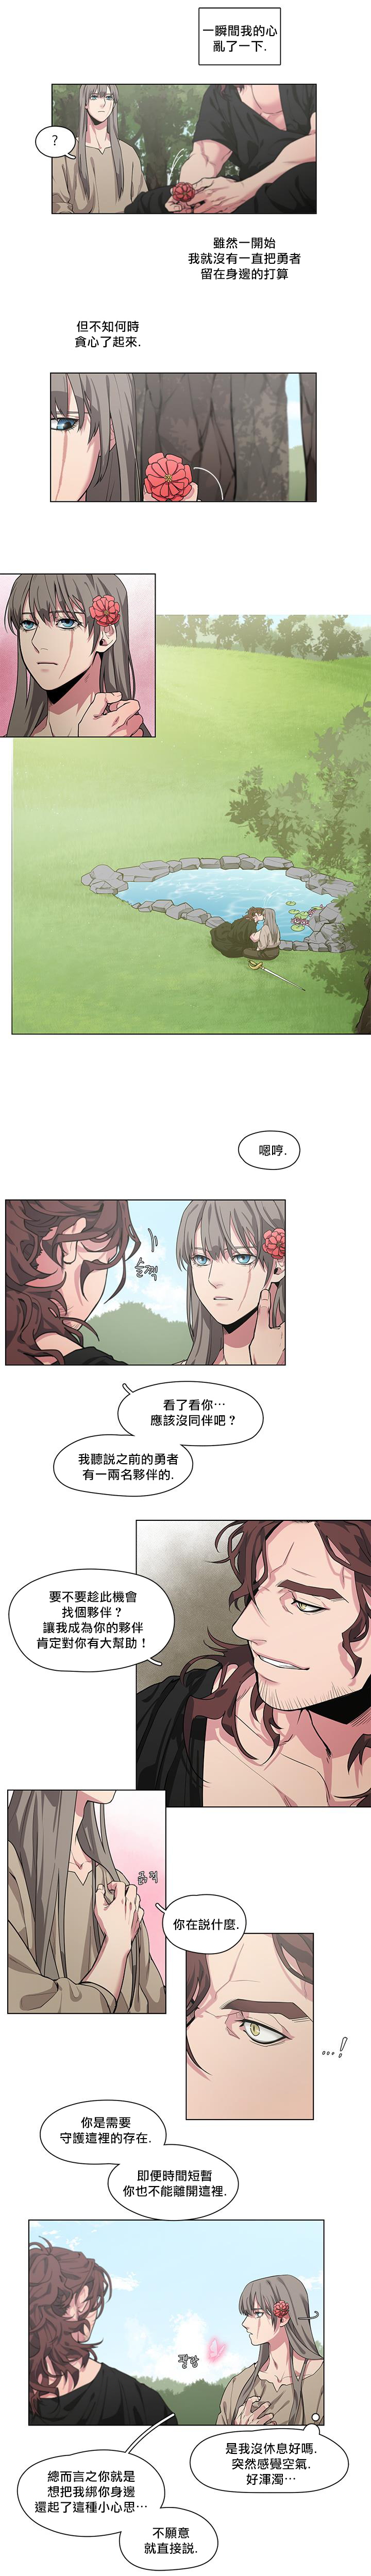 [Potion] The Warrior and the Deity | 勇者与山神 Ch. 2-4 [Chinese] 용사와 신령